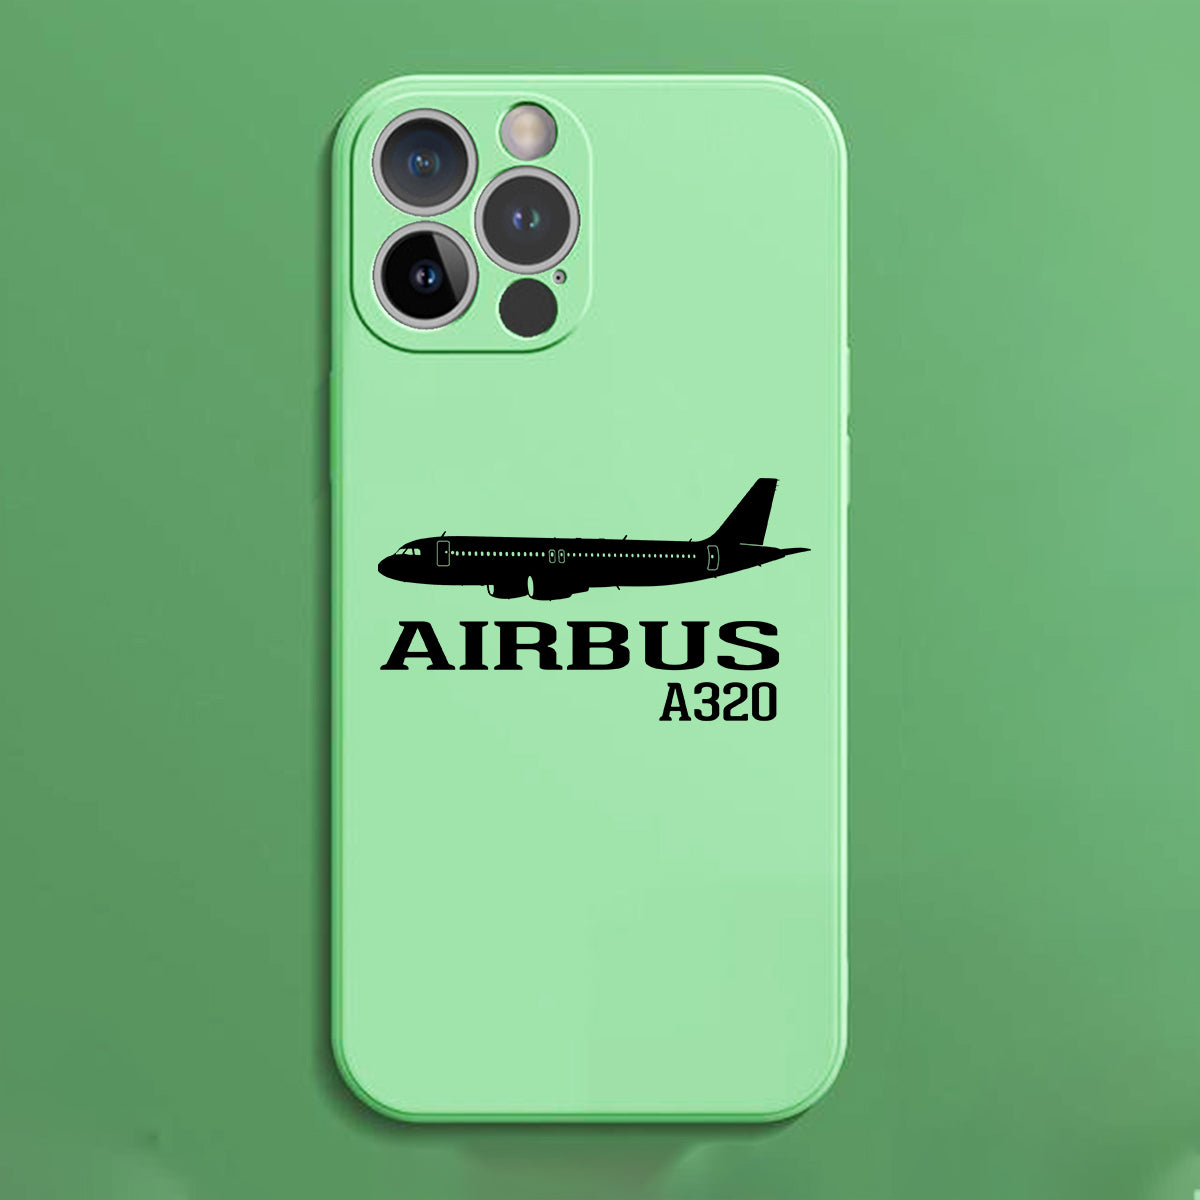 Airbus A320 Printed Designed Soft Silicone iPhone Cases